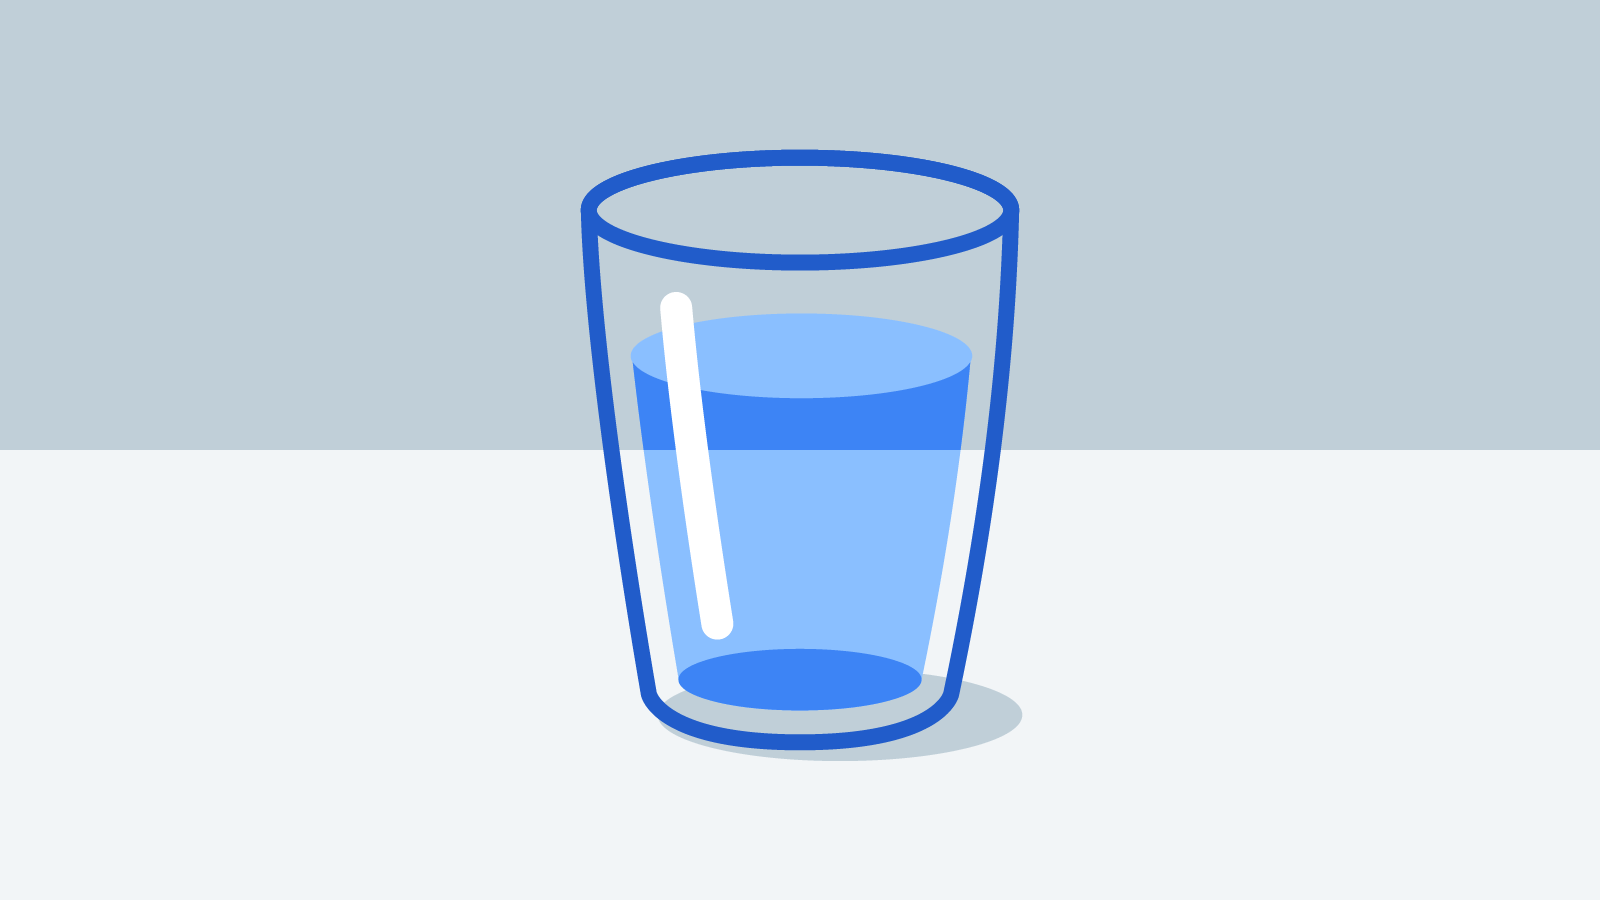 A clear, clean glass of water sitting on a spotless table.